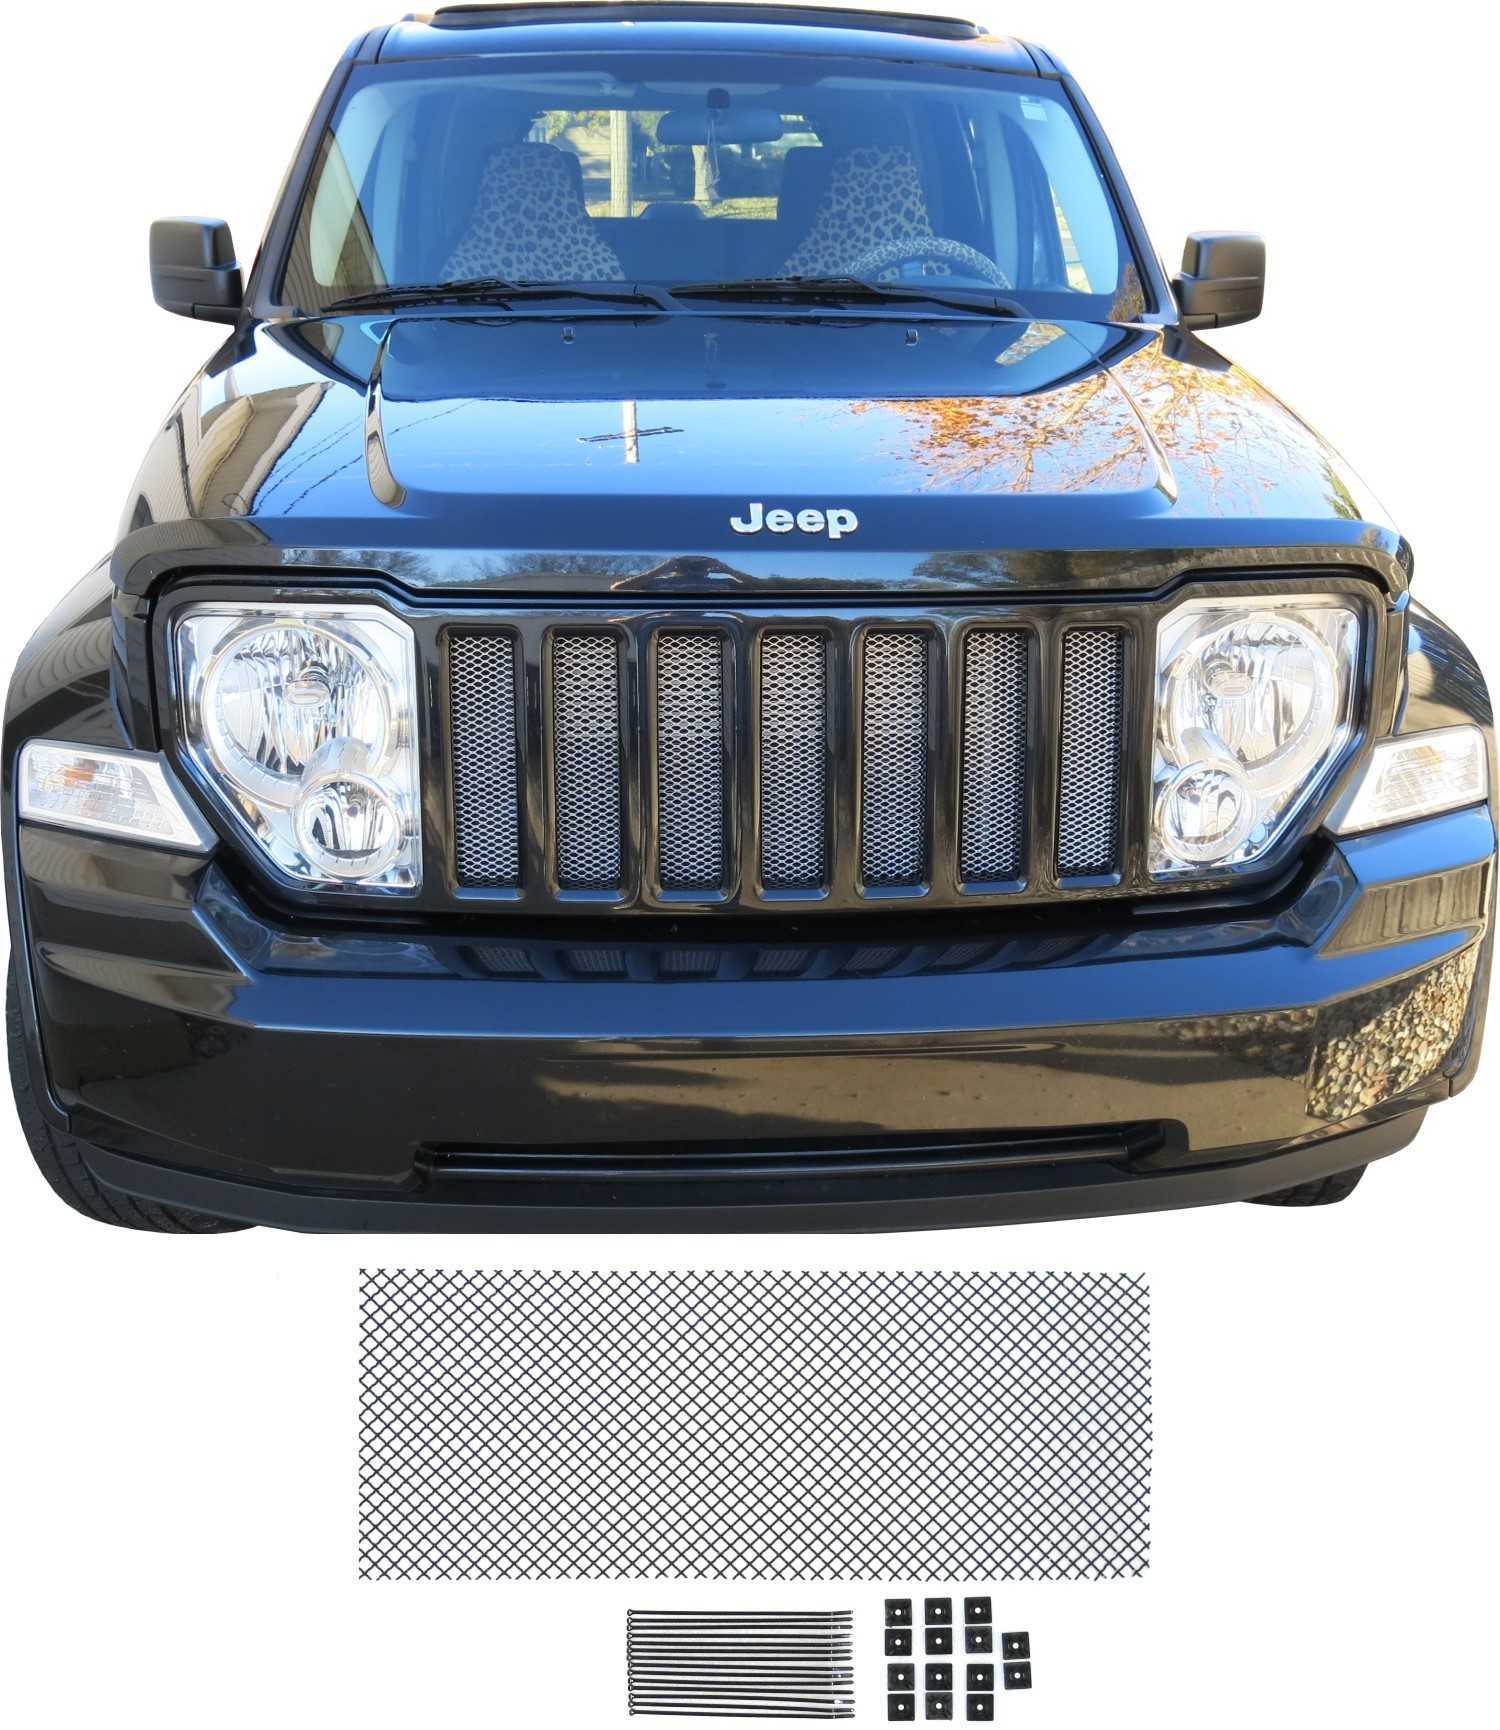 Mesh Grill Kit For 2008 - 2012 Jeep Liberty #1